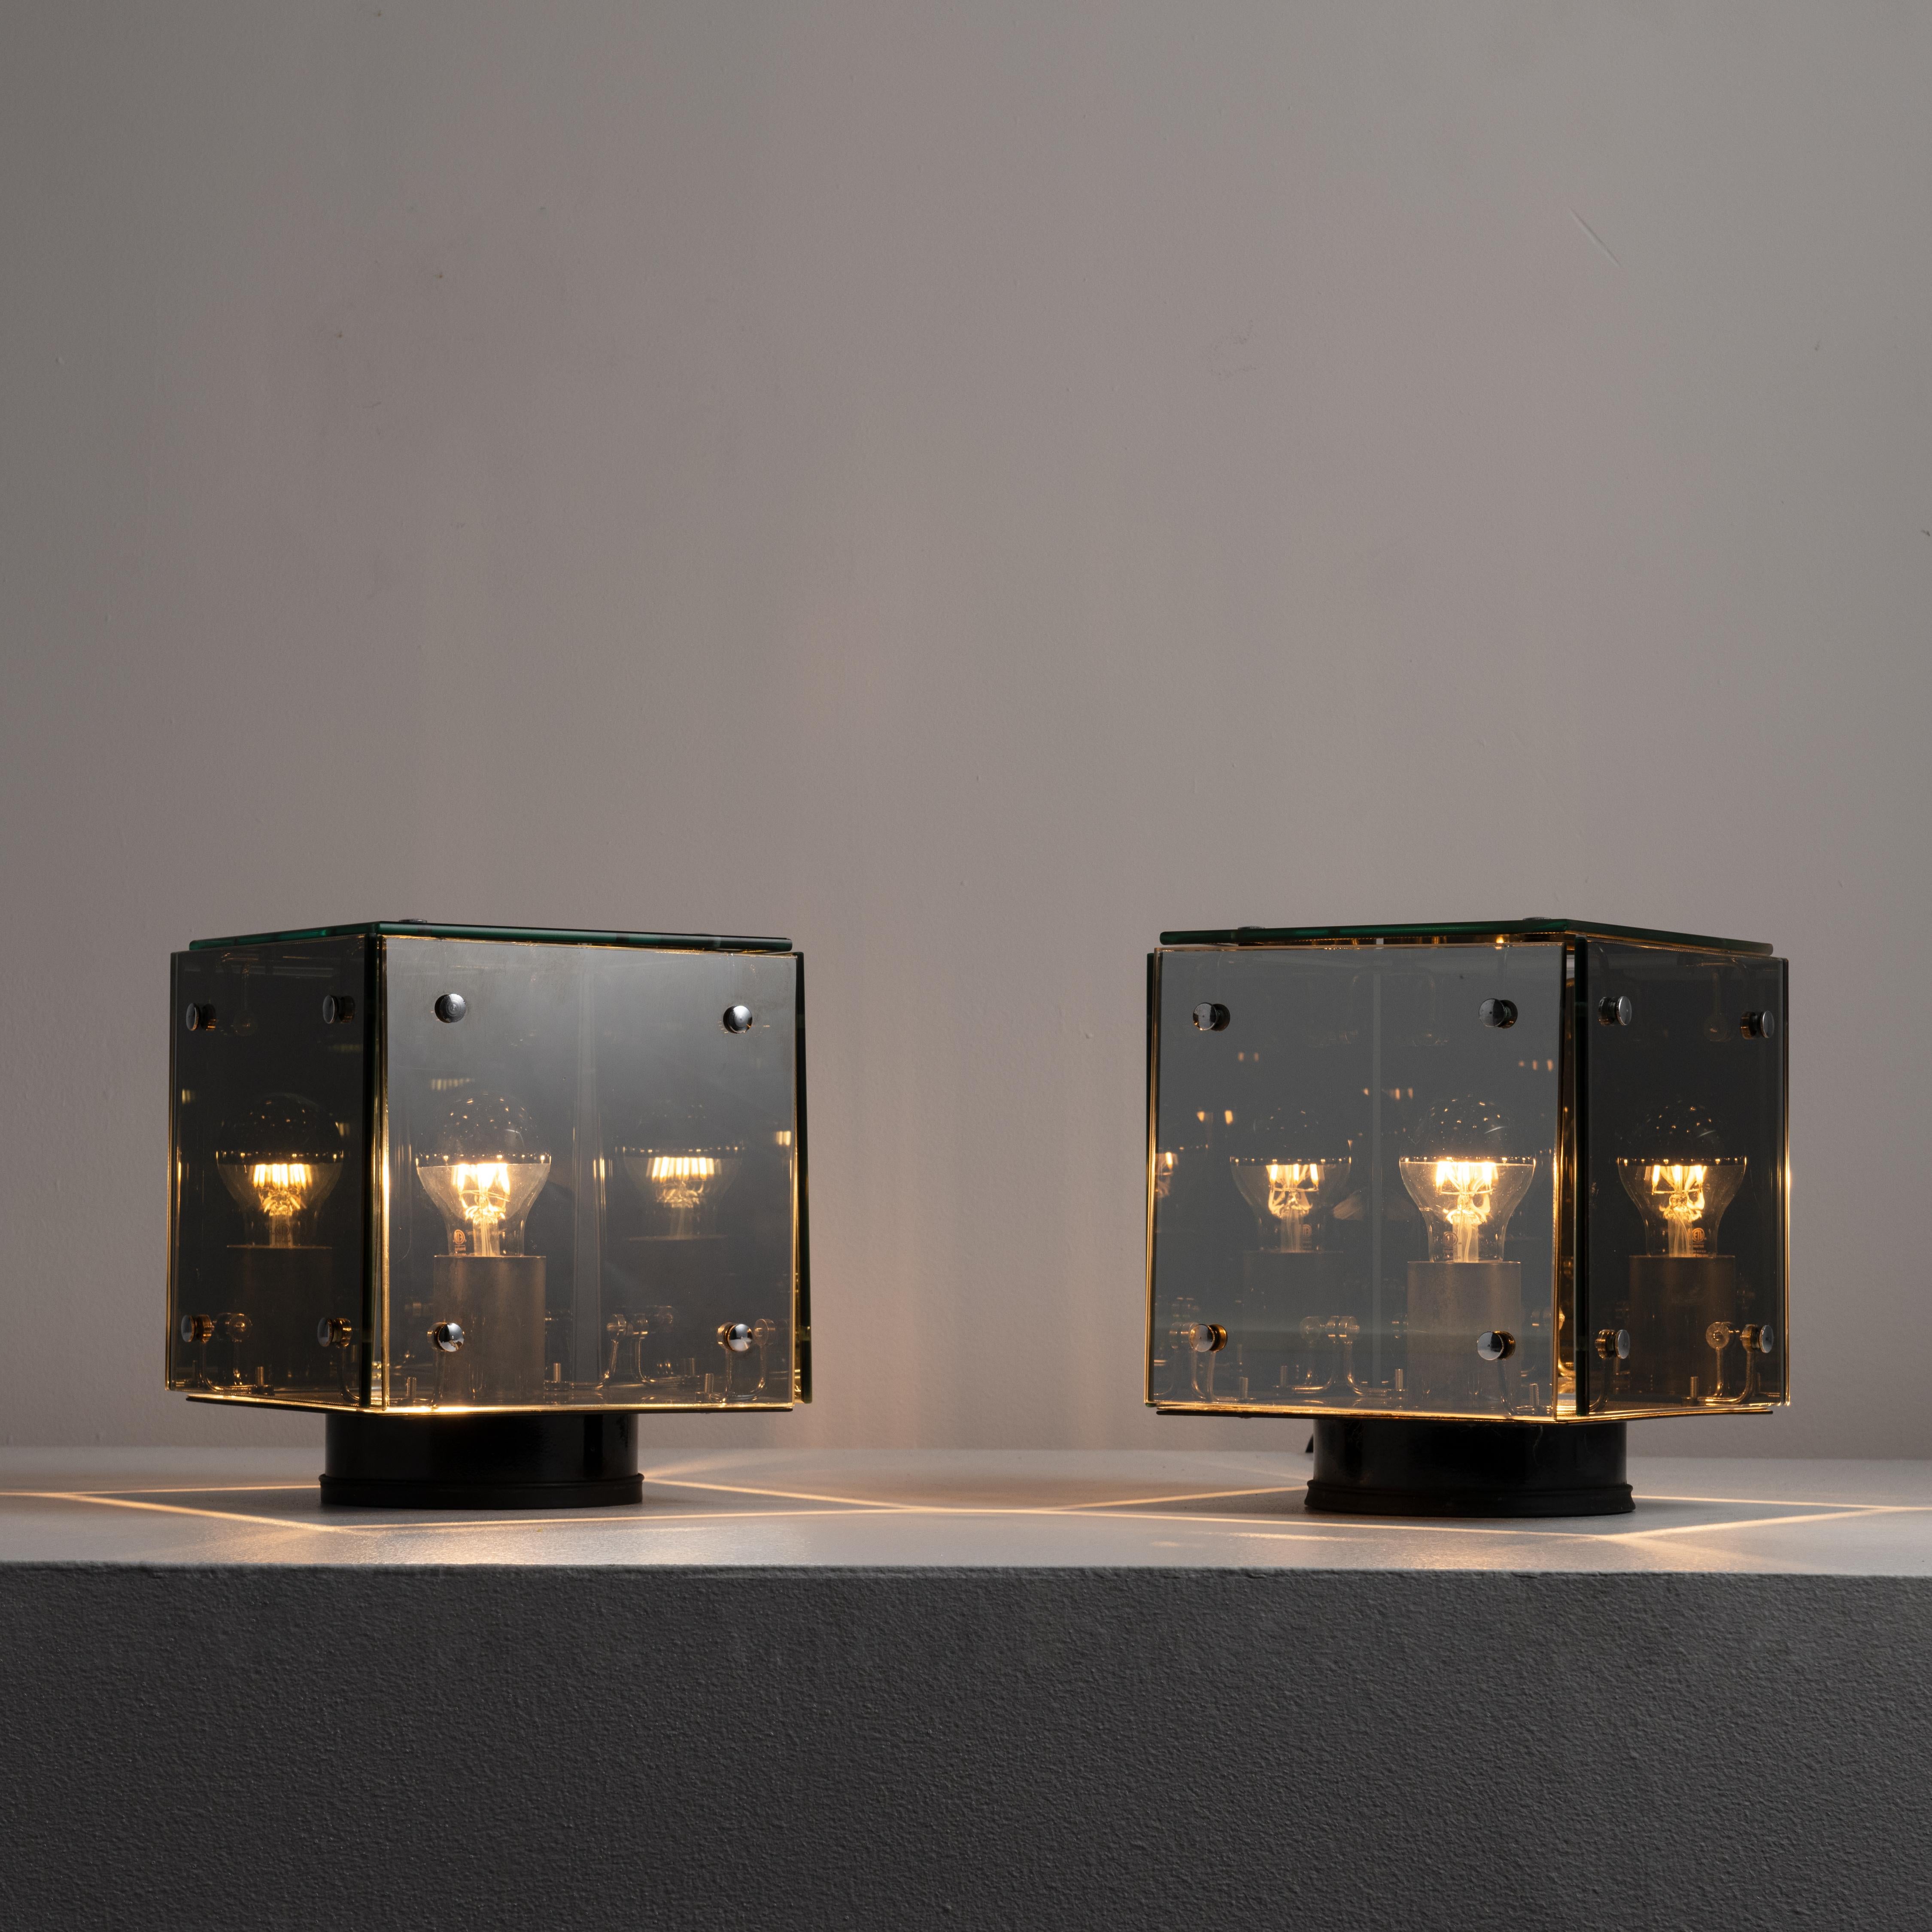 Pair of 'Prismar' Table Lamp by Studio Arditi for Nucleo Sormani. Designed and manufactured in Italy, in 1972. All-mirrored cubic table lamps with chrome details. The glass panels are mirror-like translucent, allowing you view inside the cubes, yet